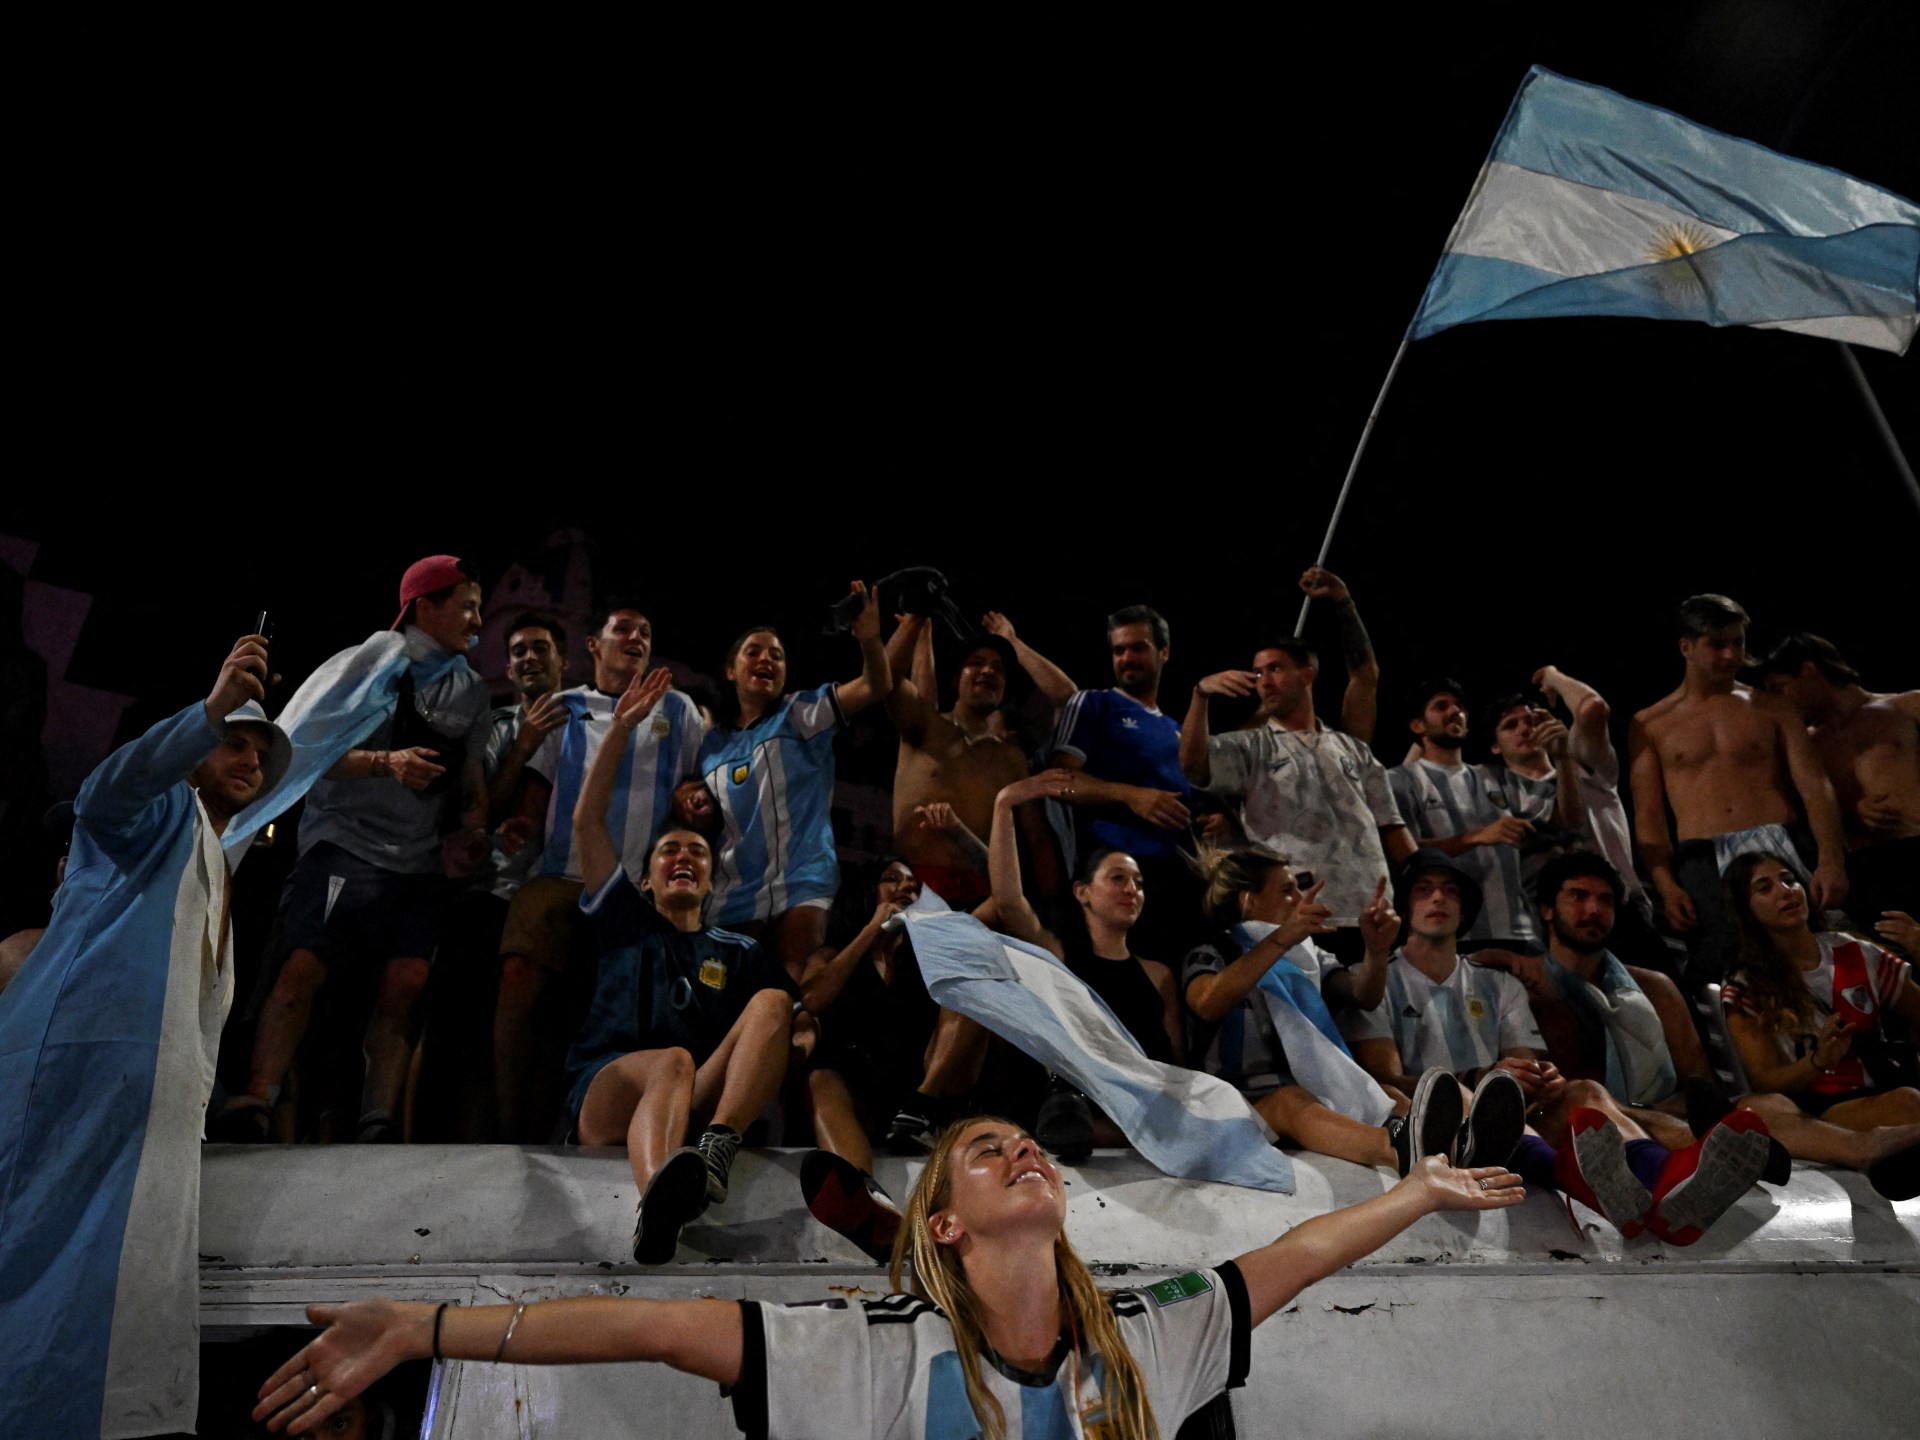 ‘Pure joy’: Argentina erupts in celebration after World Cup win | Qatar World Cup 2022 News